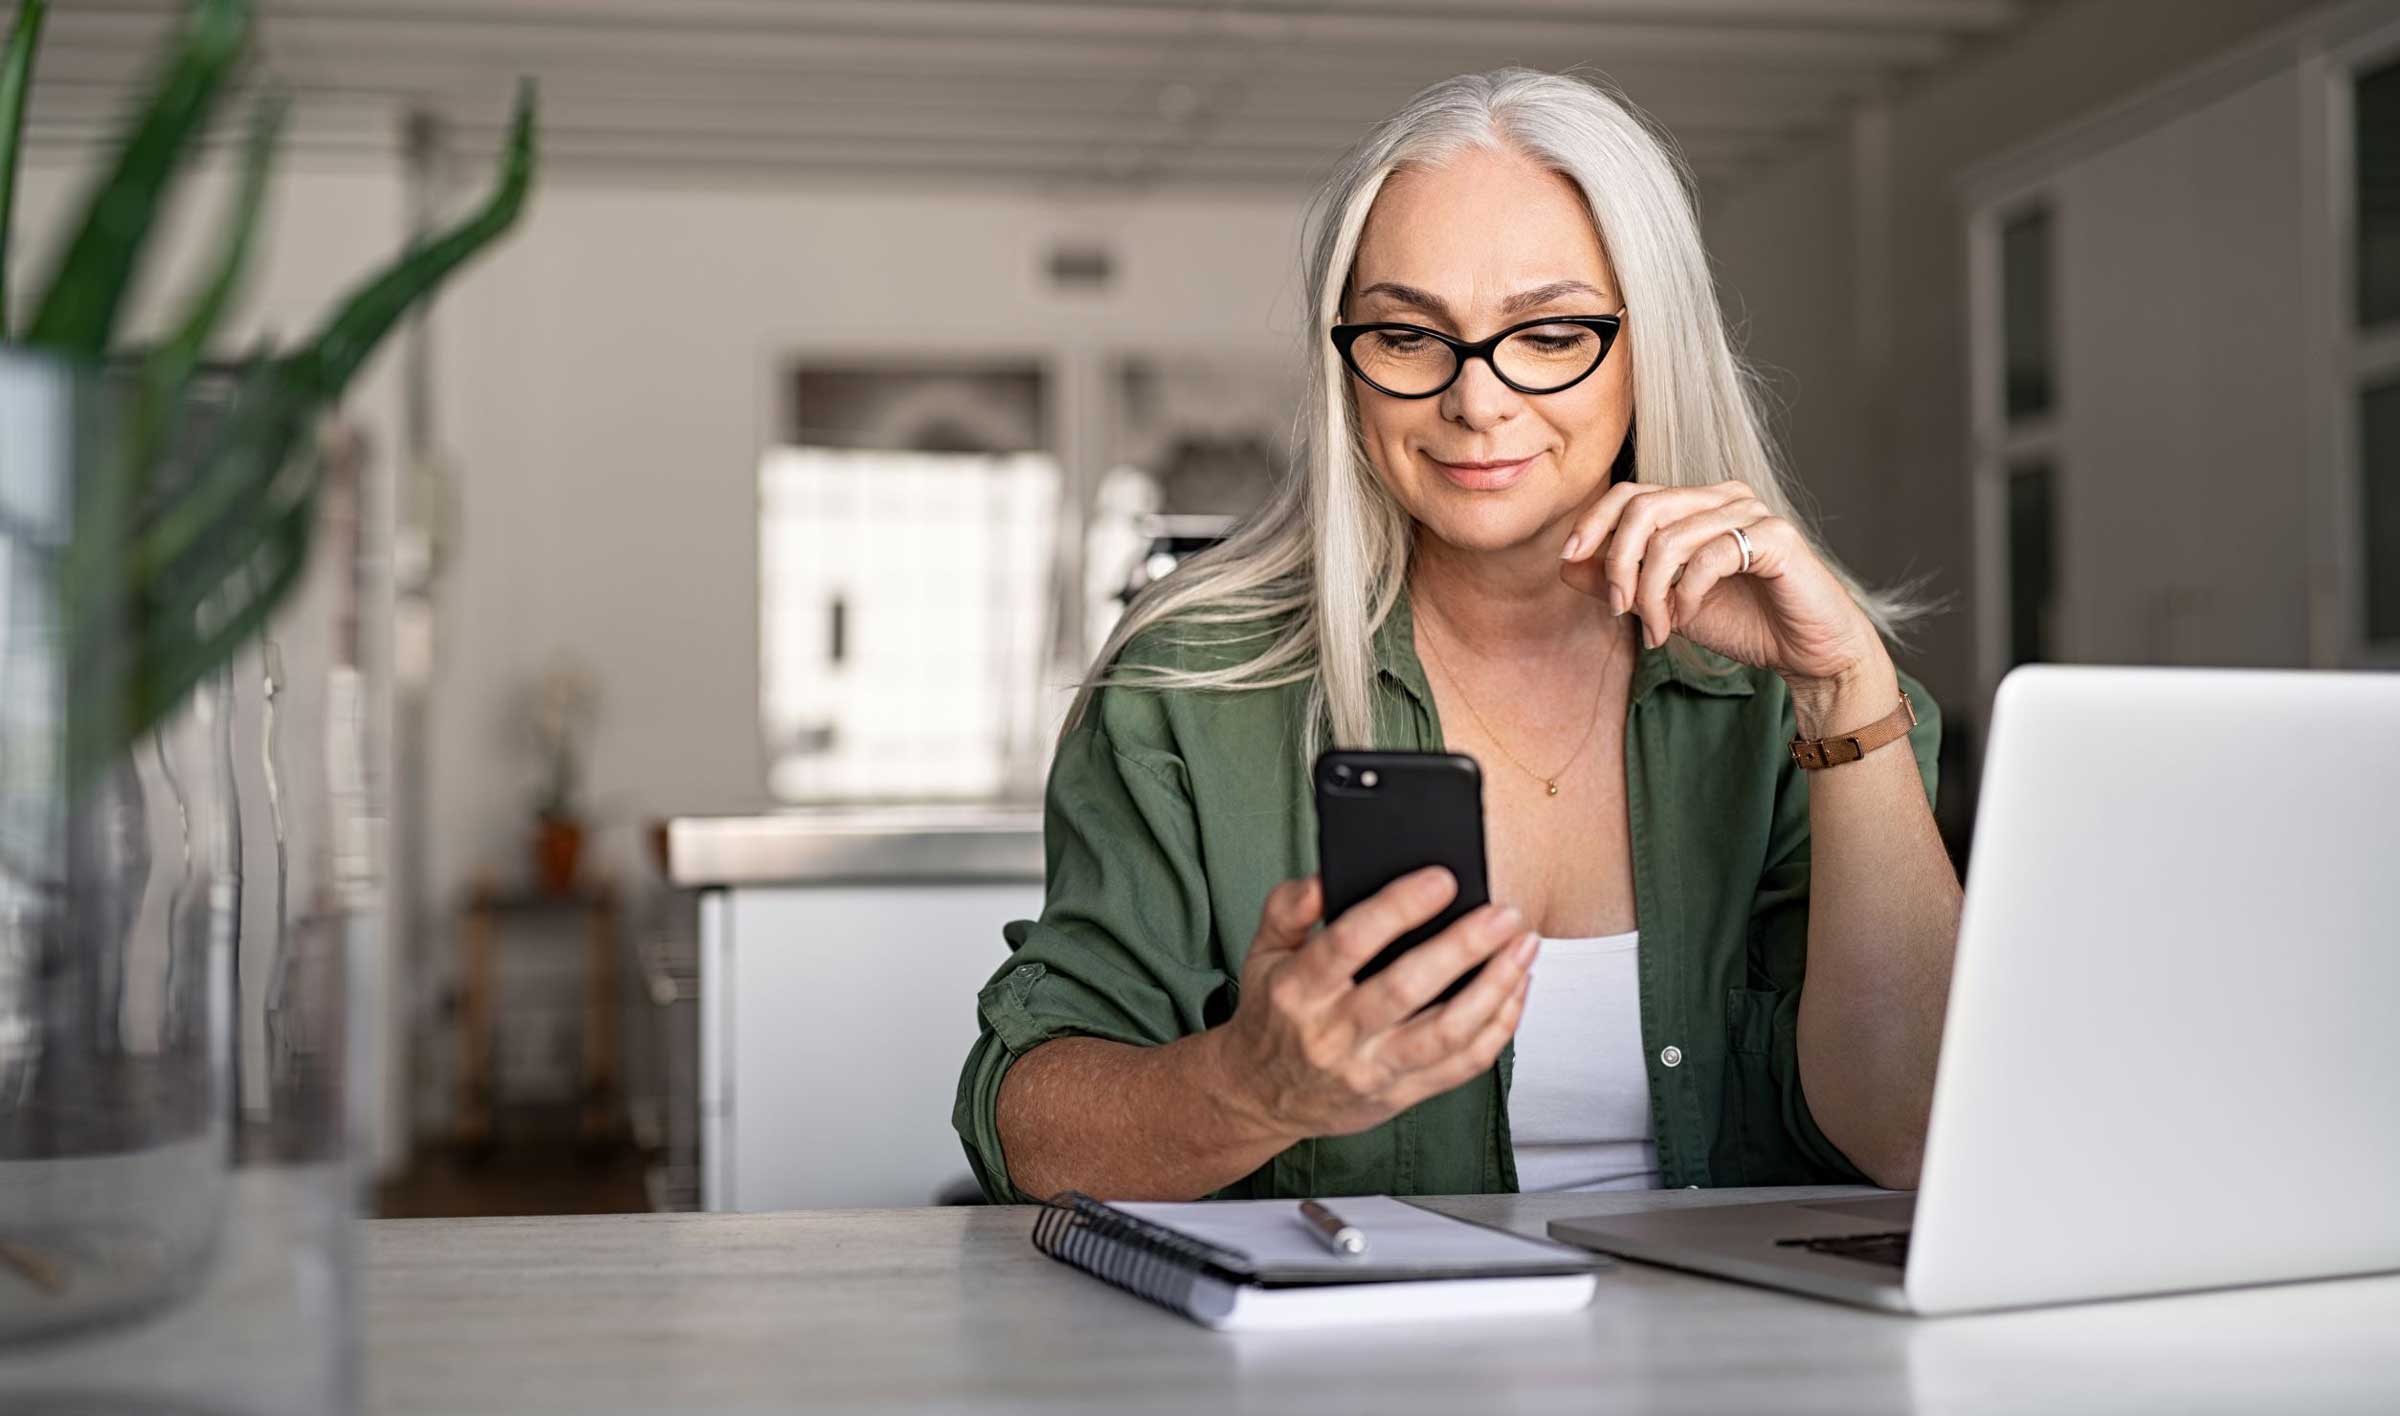 Happy senior woman using mobile phone while working at home with laptop. Smiling cool old woman wearing eyeglasses messaging with smartphone. Beautiful stylish elderly lady browsing site on cellphone.